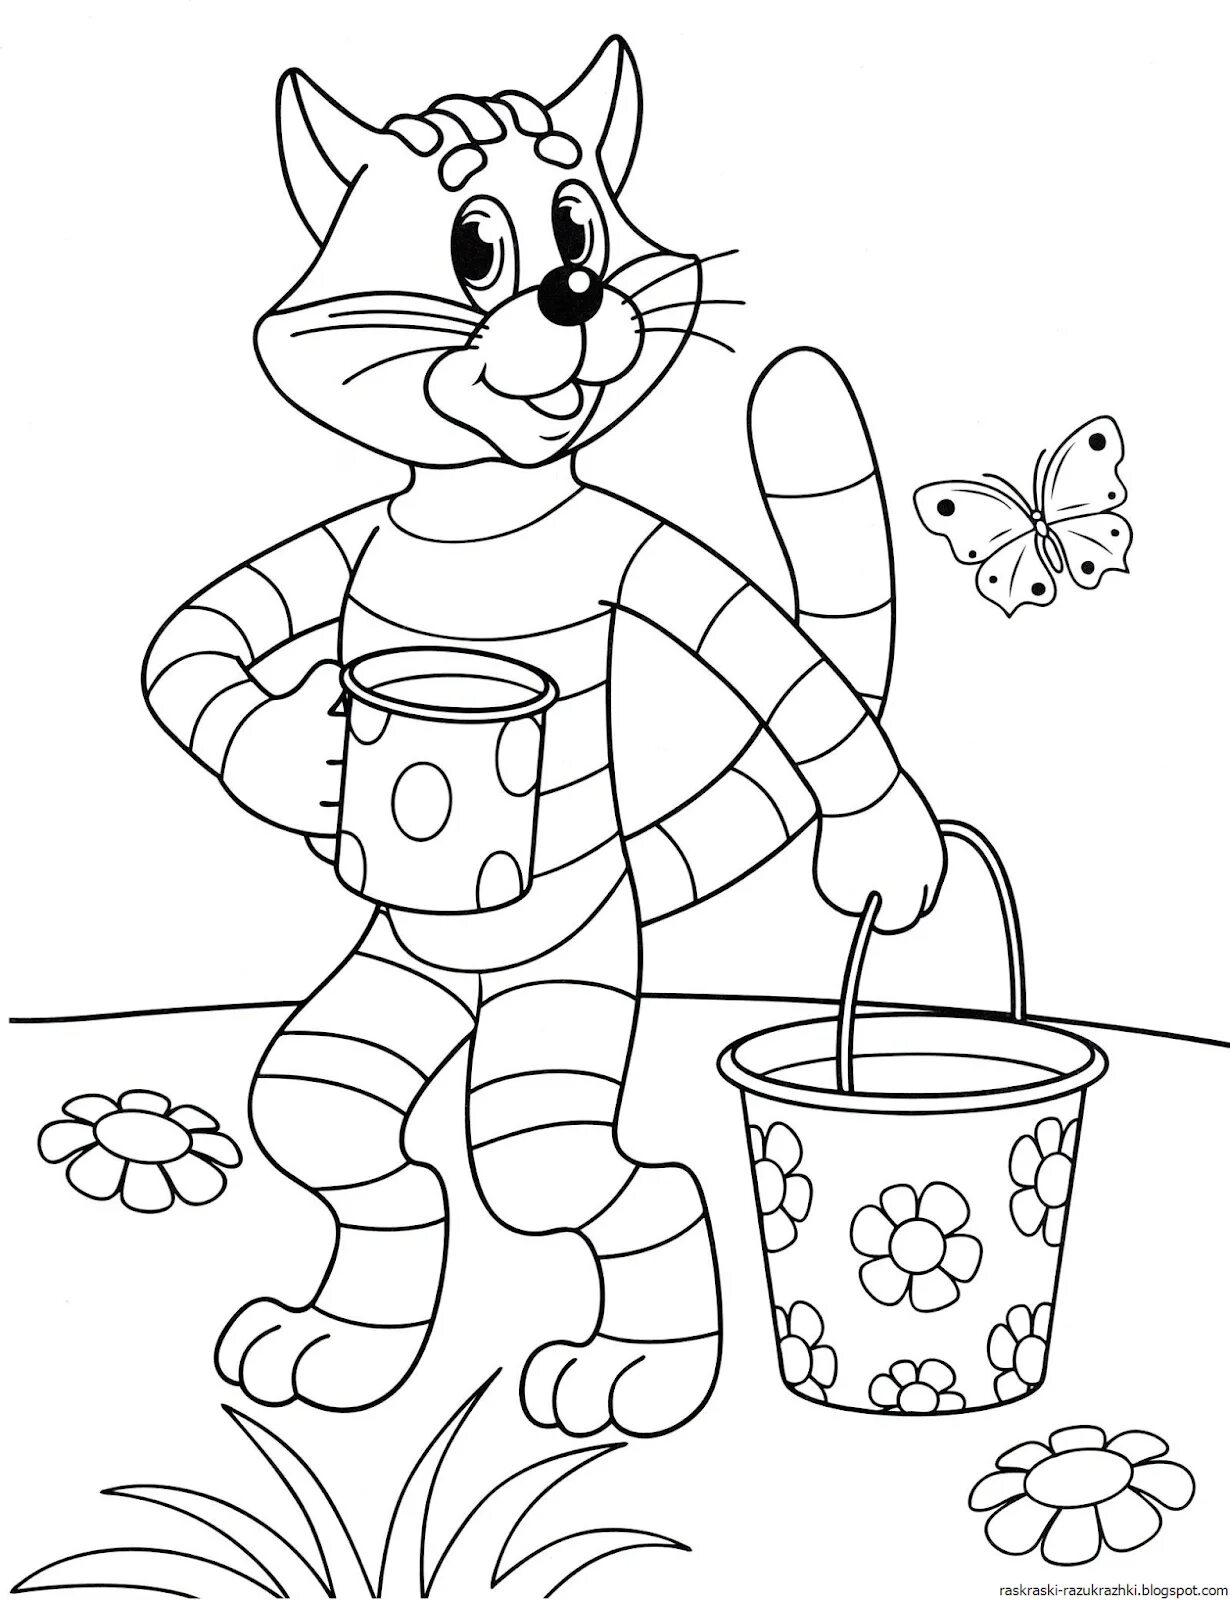 Trendy sailor skins coloring page for beginners